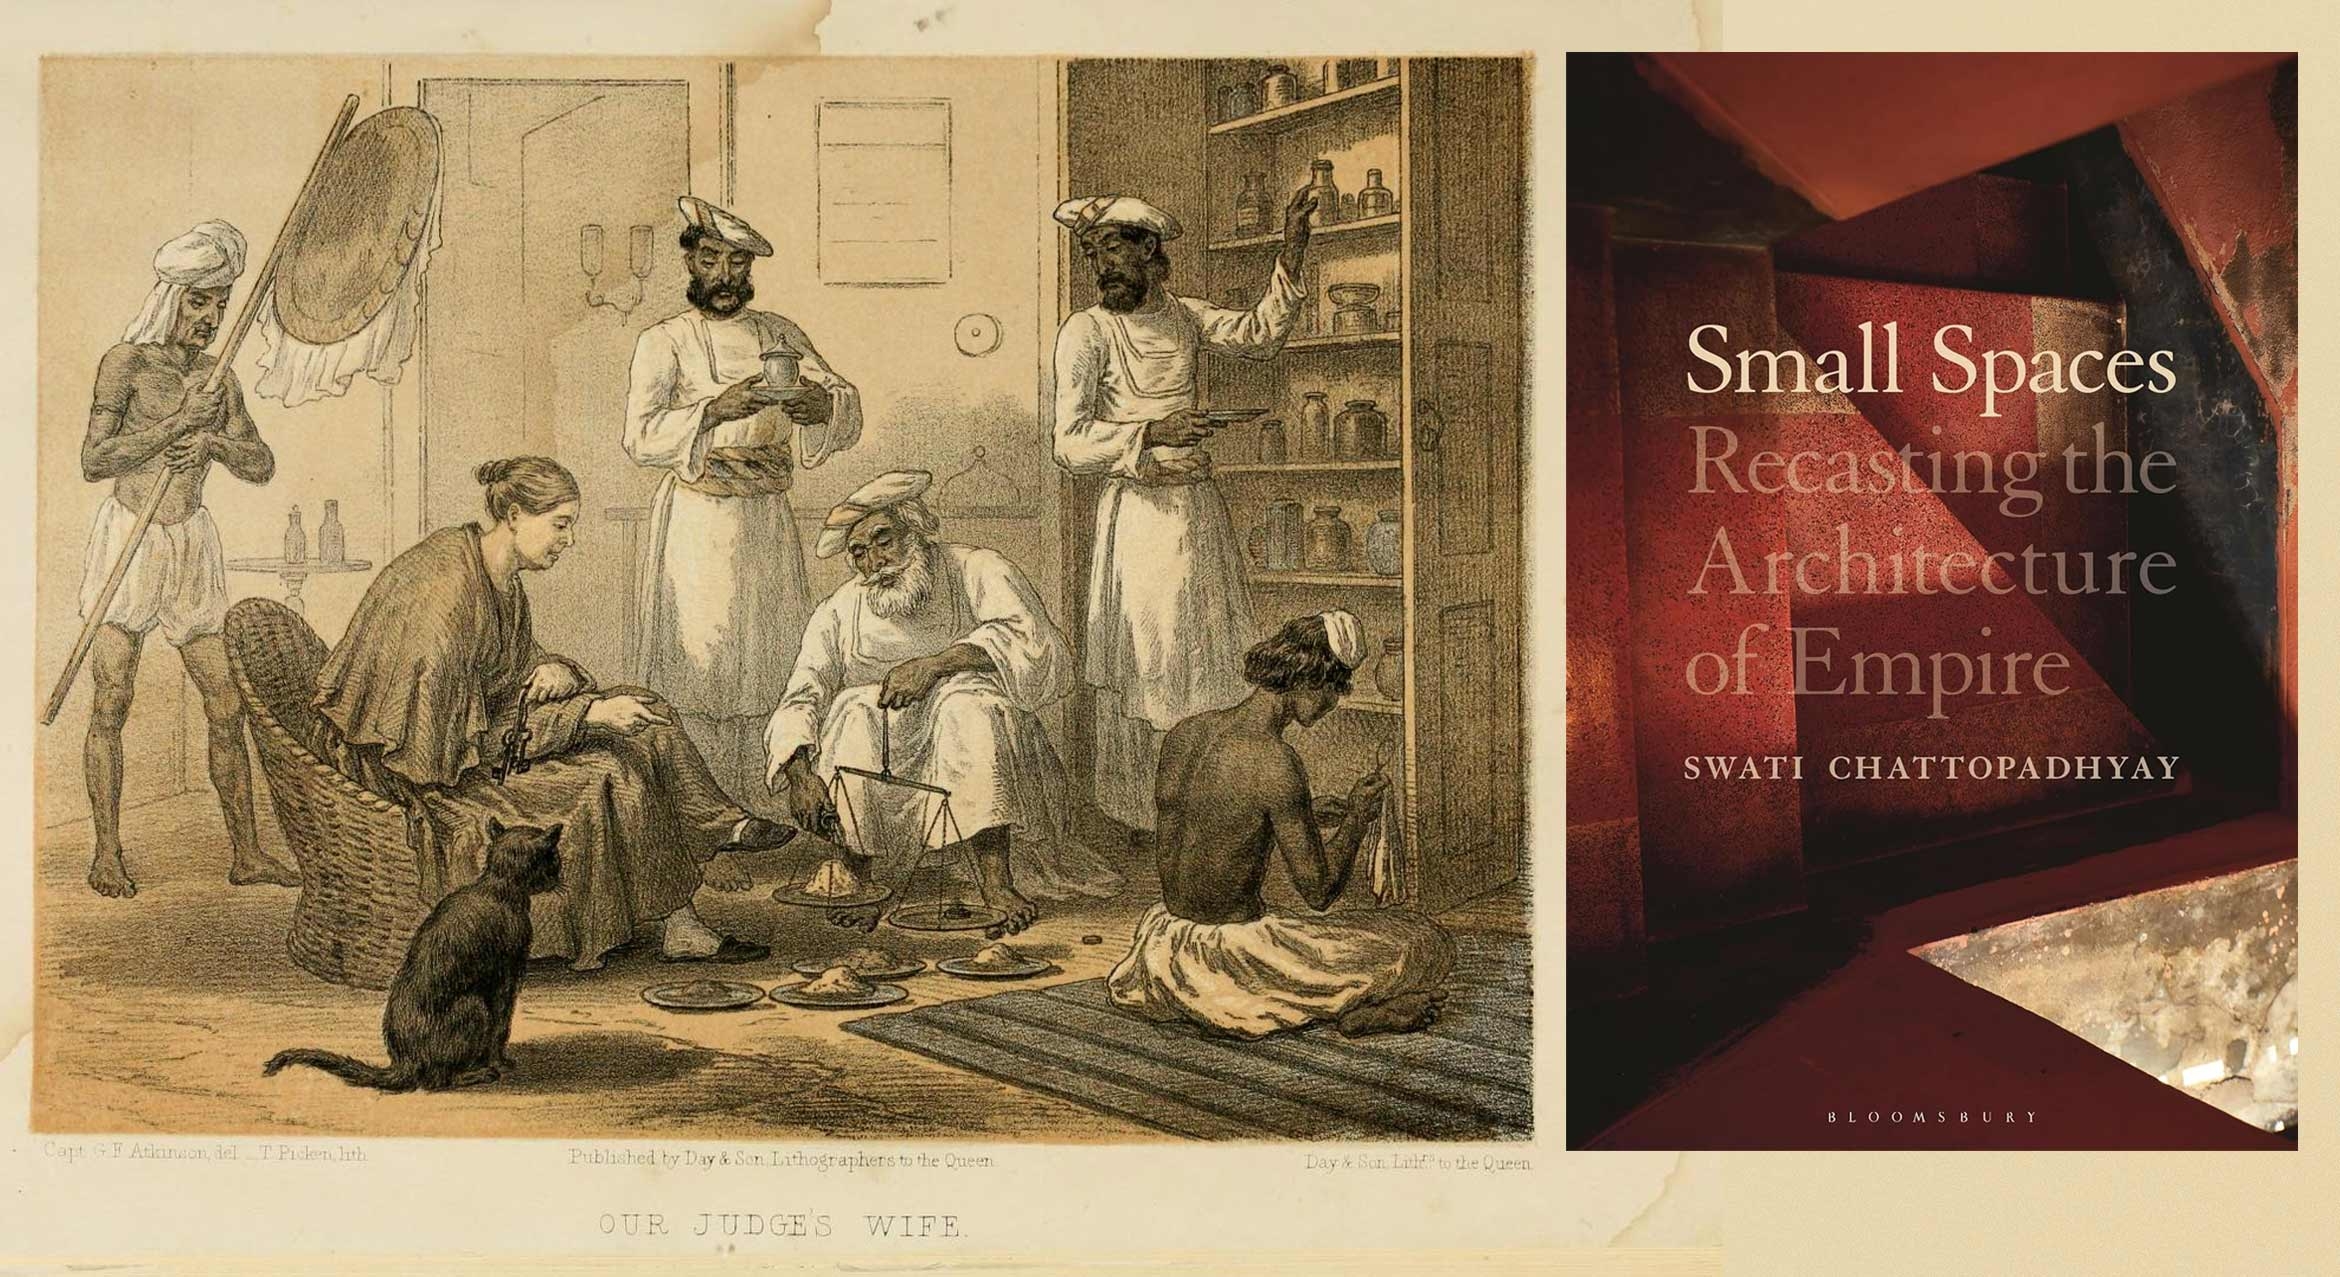 book cover and a drawing of people cooking in India